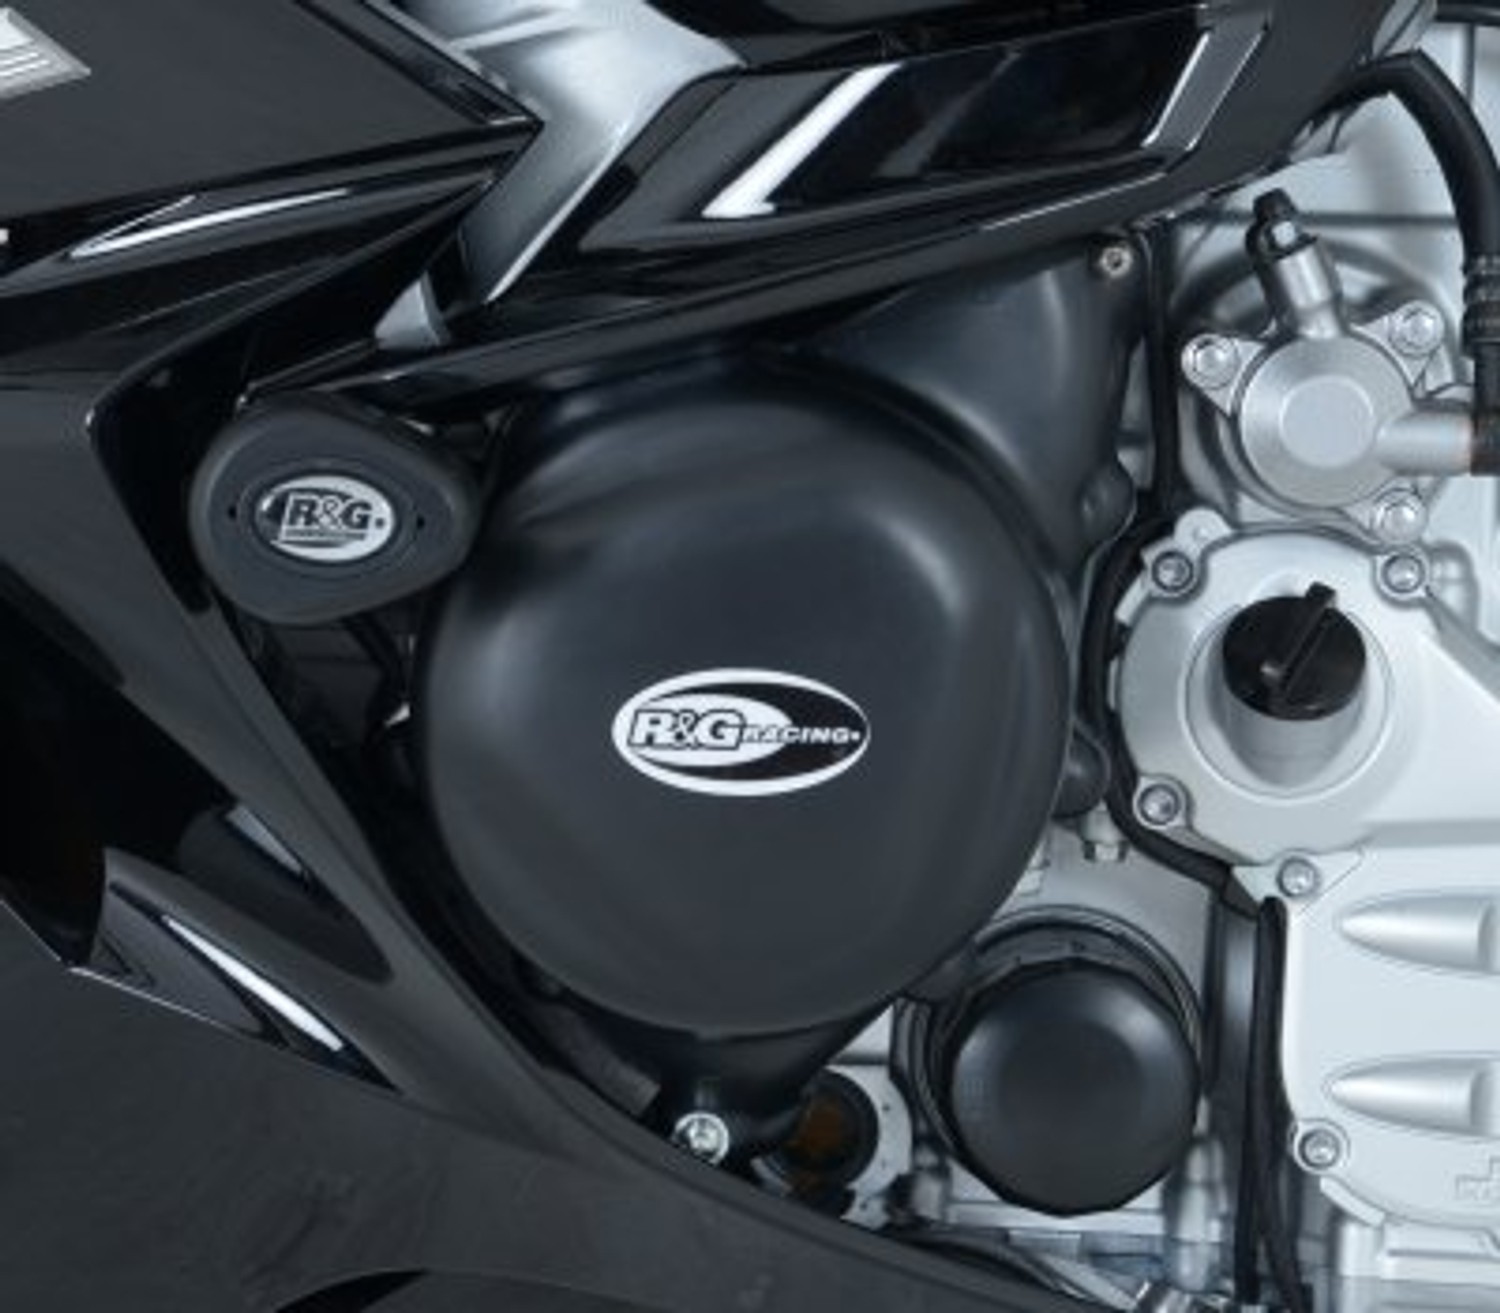 ES Engine Case Covers A AE T-Rex Racing 2013-2019 Yamaha FJR1300